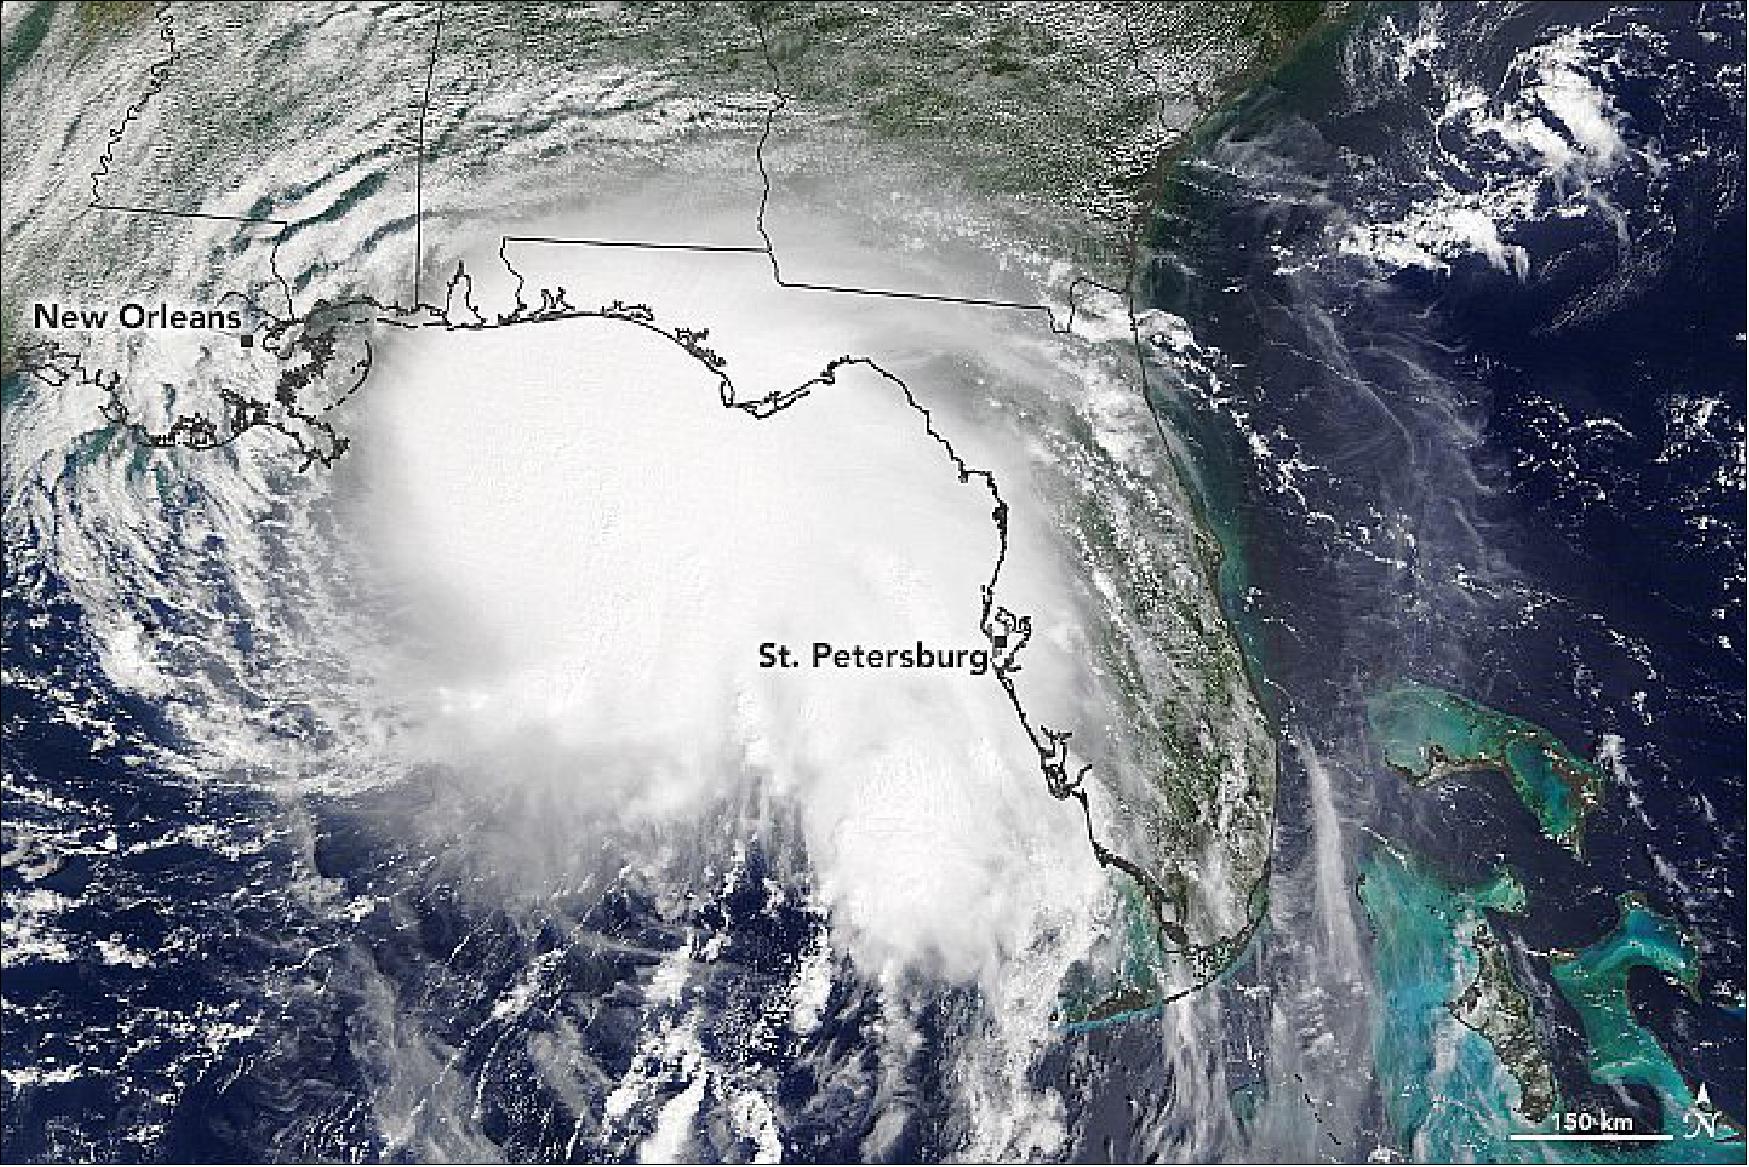 Figure 9: This image shows Hurricane Sally, which quickly strengthened into a category 1 storm as it approached the U.S. Gulf Coast. The image was acquired around midday on September 14 by the Moderate Resolution Imaging Spectroradiometer (MODIS) on NASA’s Terra satellite. Around the time of the image, Sally had maximum sustained winds of 90 miles (150 km) per hour (image credit: NASA Earth Observatory)